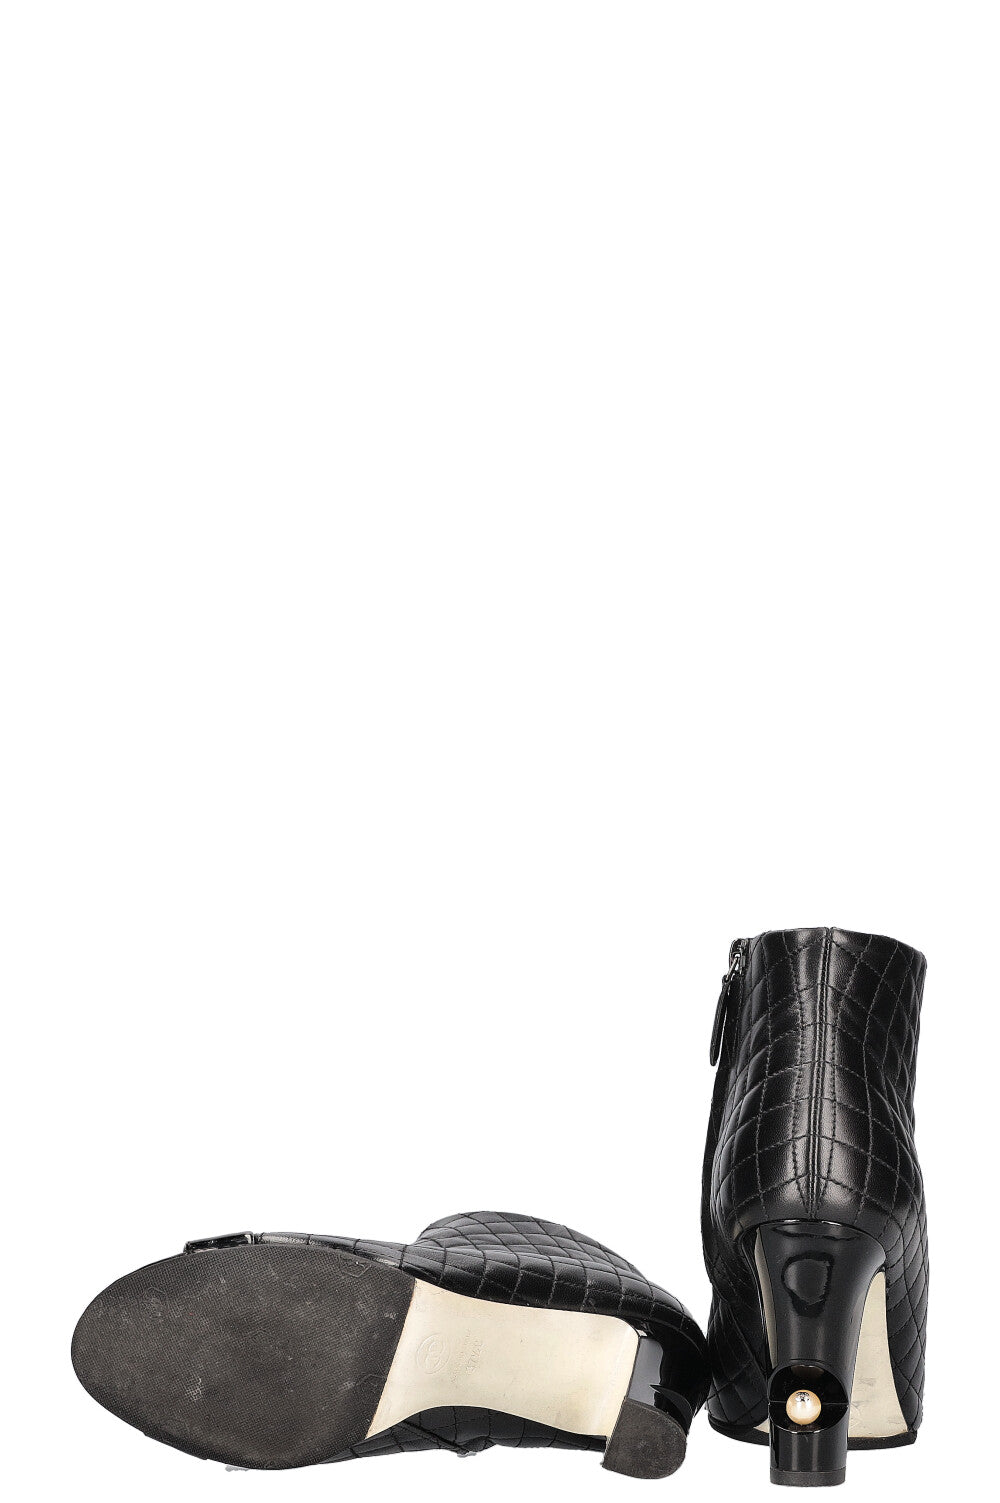 CHANEL Quilted Pearl Boots Black